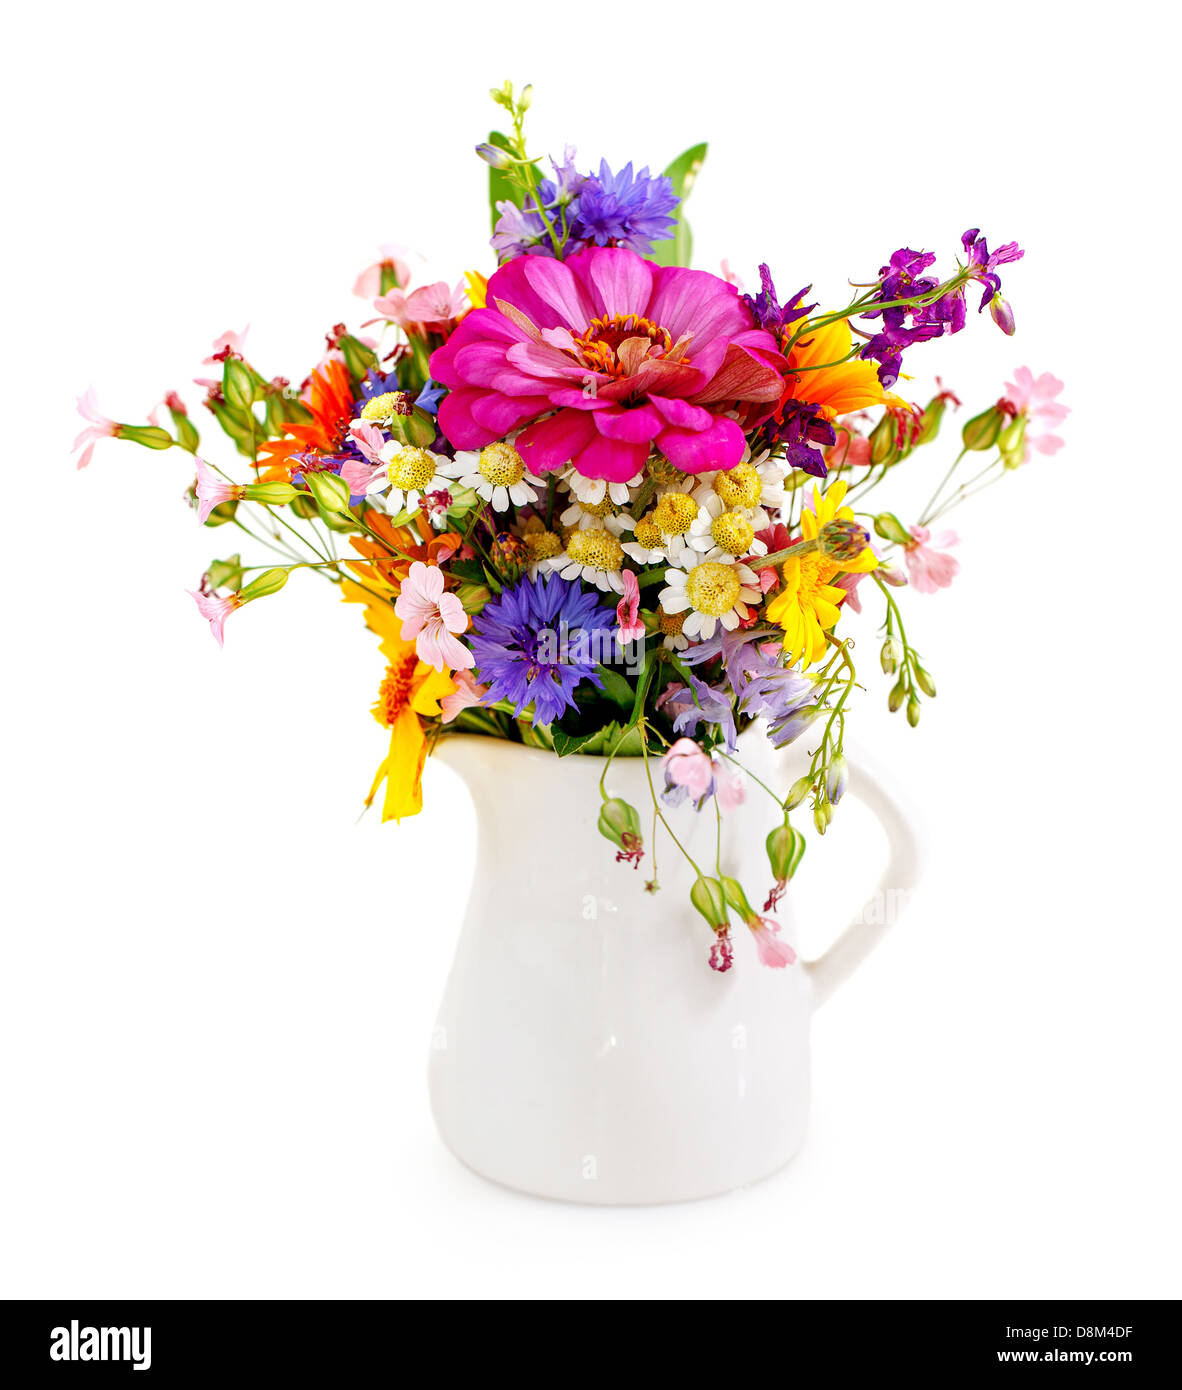 Bouquet of flowers in the white vase Stock Photo